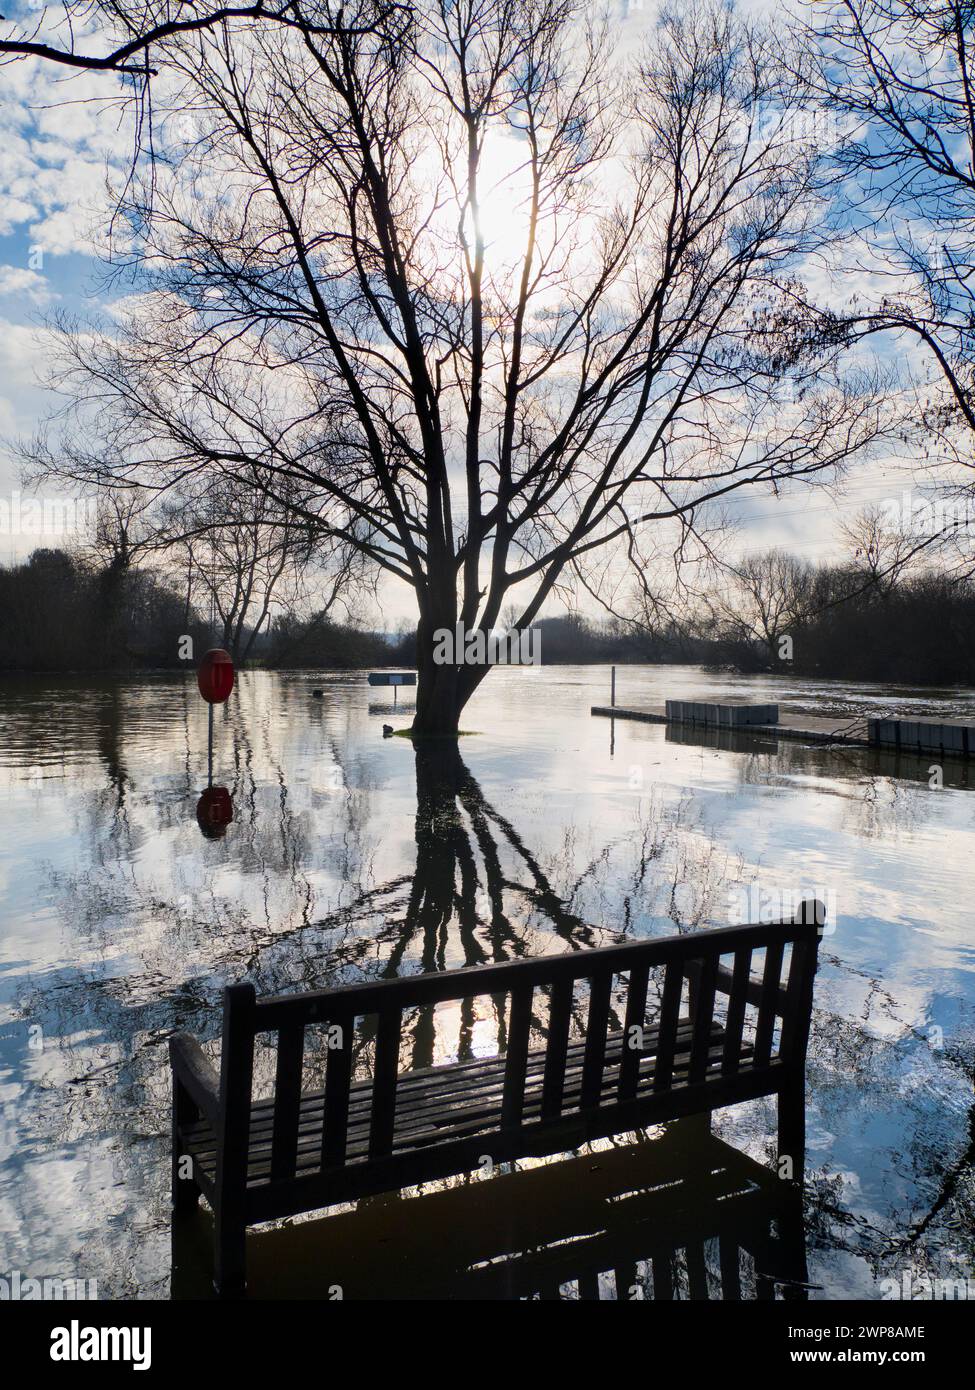 An early view of the Thames at Sandford, early on a winter's day.  But the scene today is different. After weeks of incessant rain, the Thames has ris Stock Photo